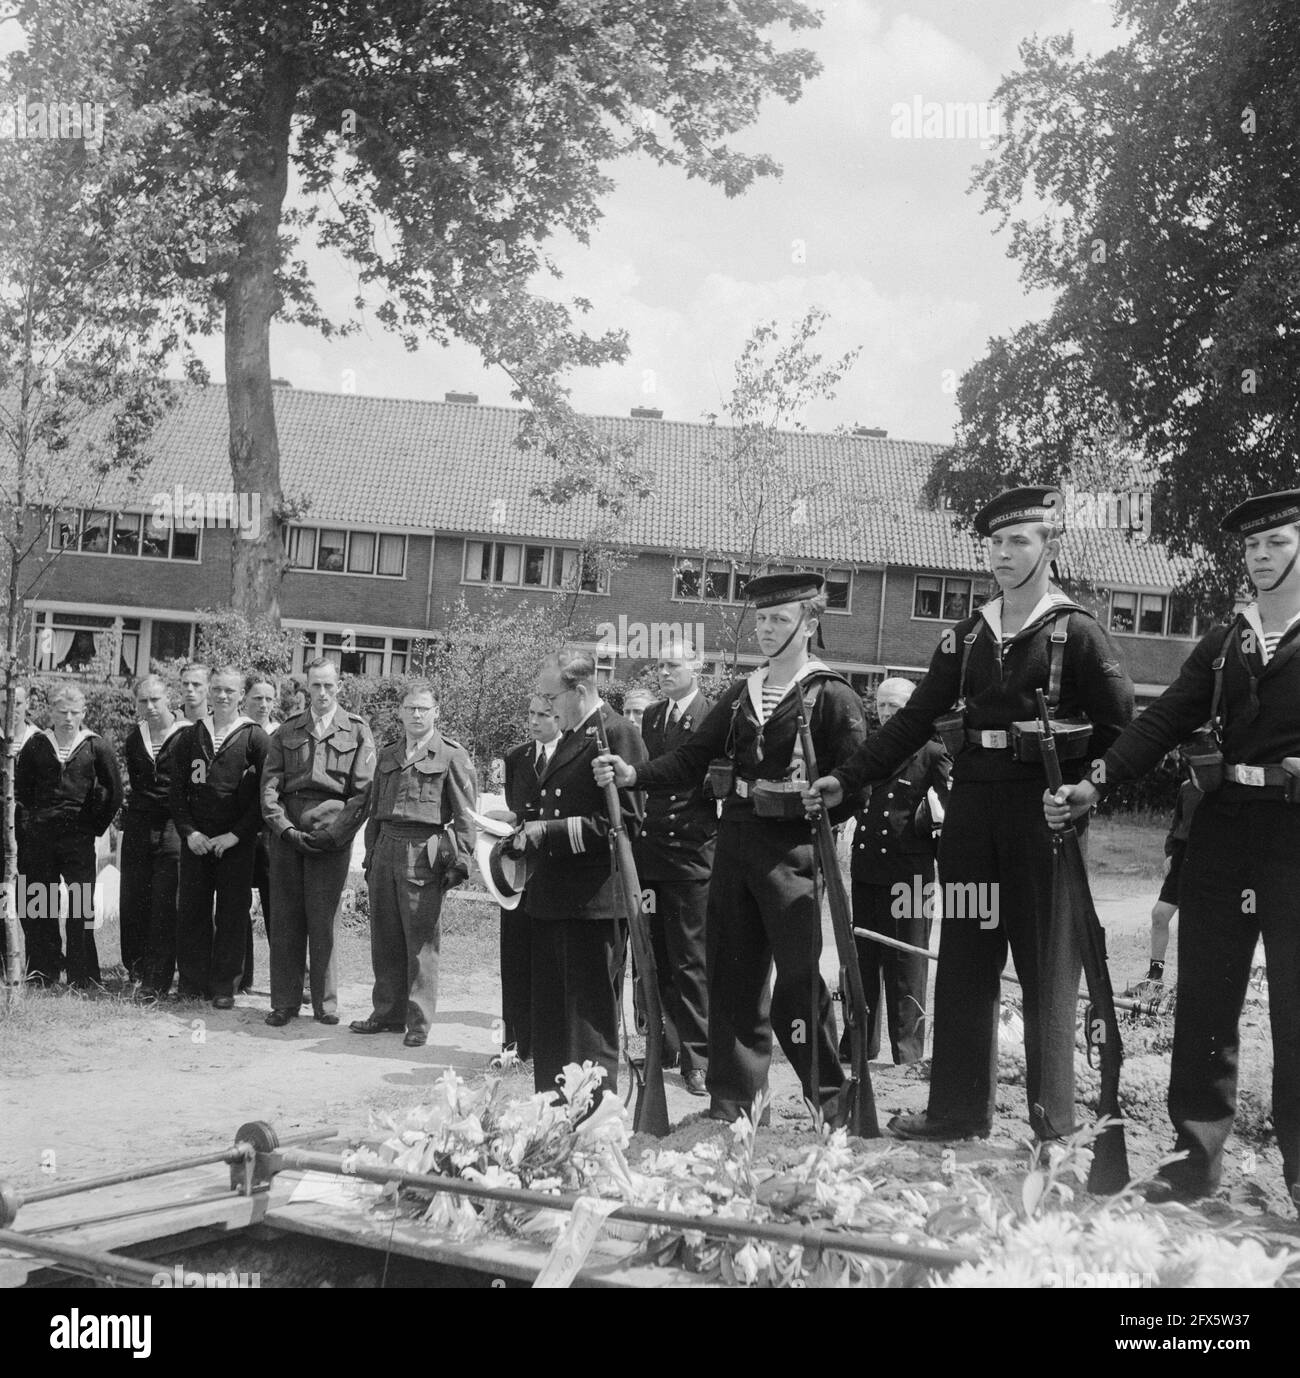 Graveside service, June 23, 1948, burials, The Netherlands, 20th century press agency photo, news to remember, documentary, historic photography 1945-1990, visual stories, human history of the Twentieth Century, capturing moments in time Stock Photo